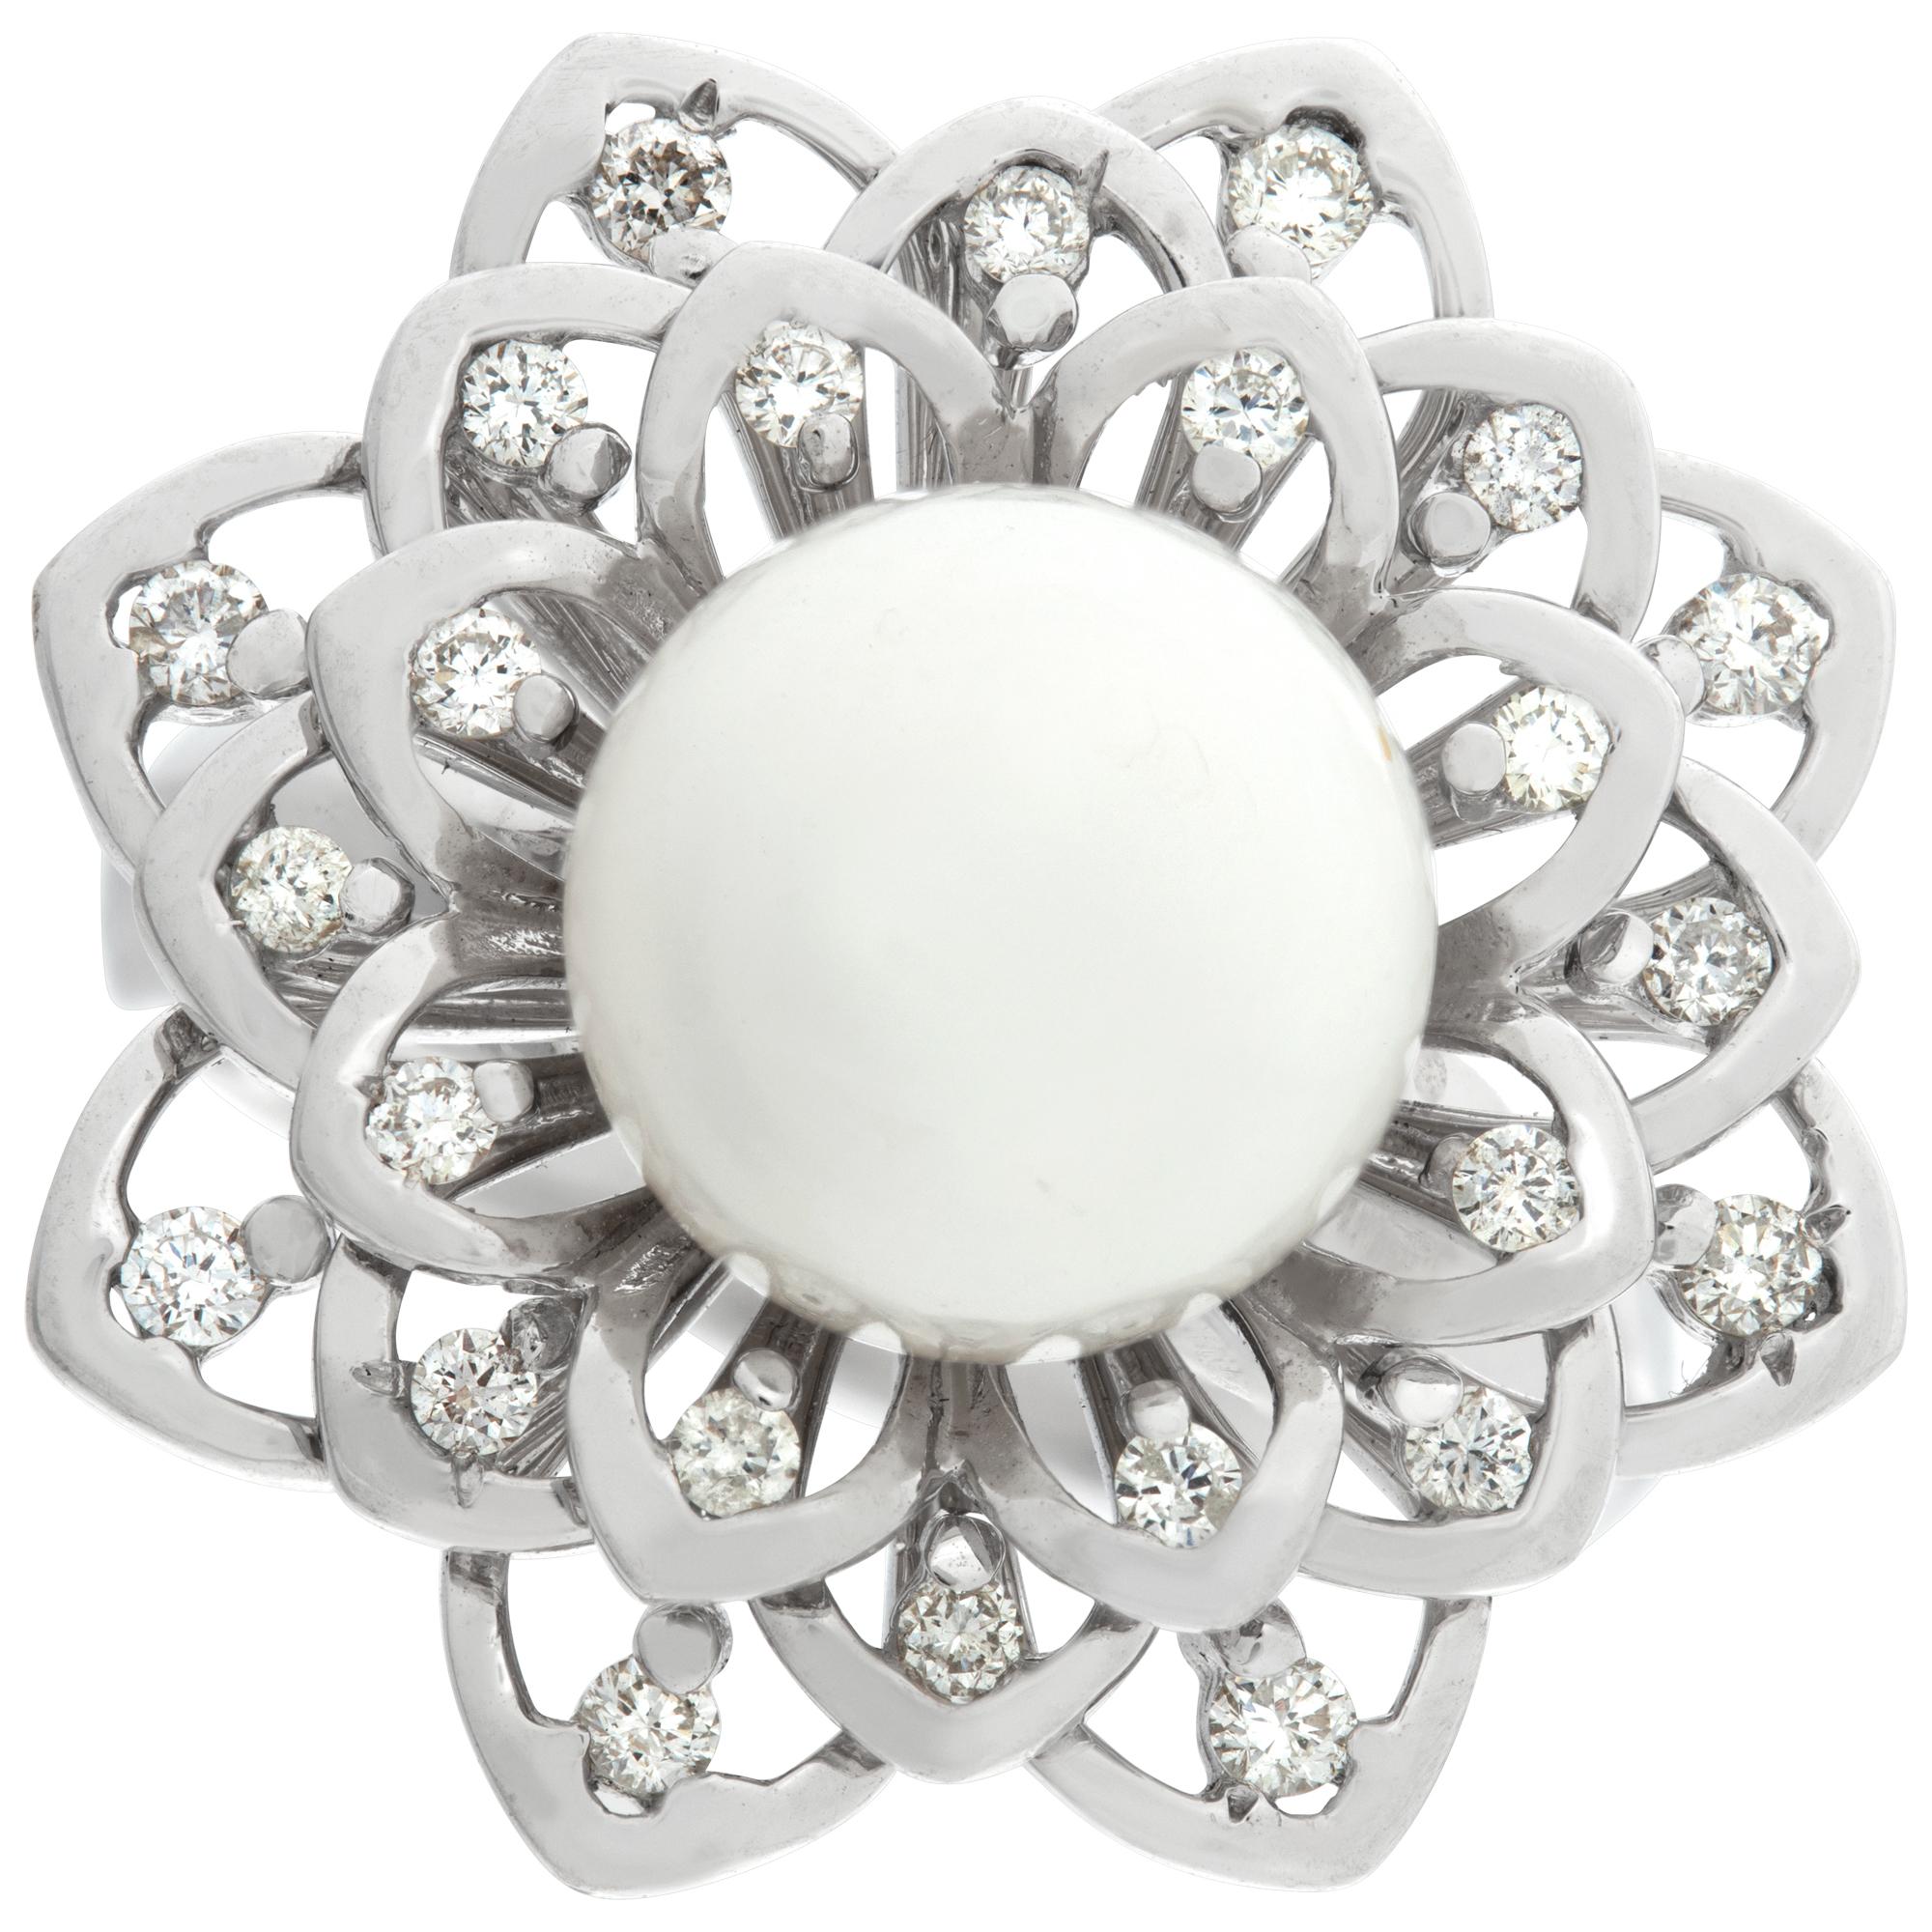 Sparkling diamond flower ring set with a 10mm South Sea Pearl all in 18k white gold with approximate 0.39 carat in round brilliant diamonds. Size 6.5.This Pearl/diamond ring is currently size 6.5 and some items can be sized up or down, please ask!